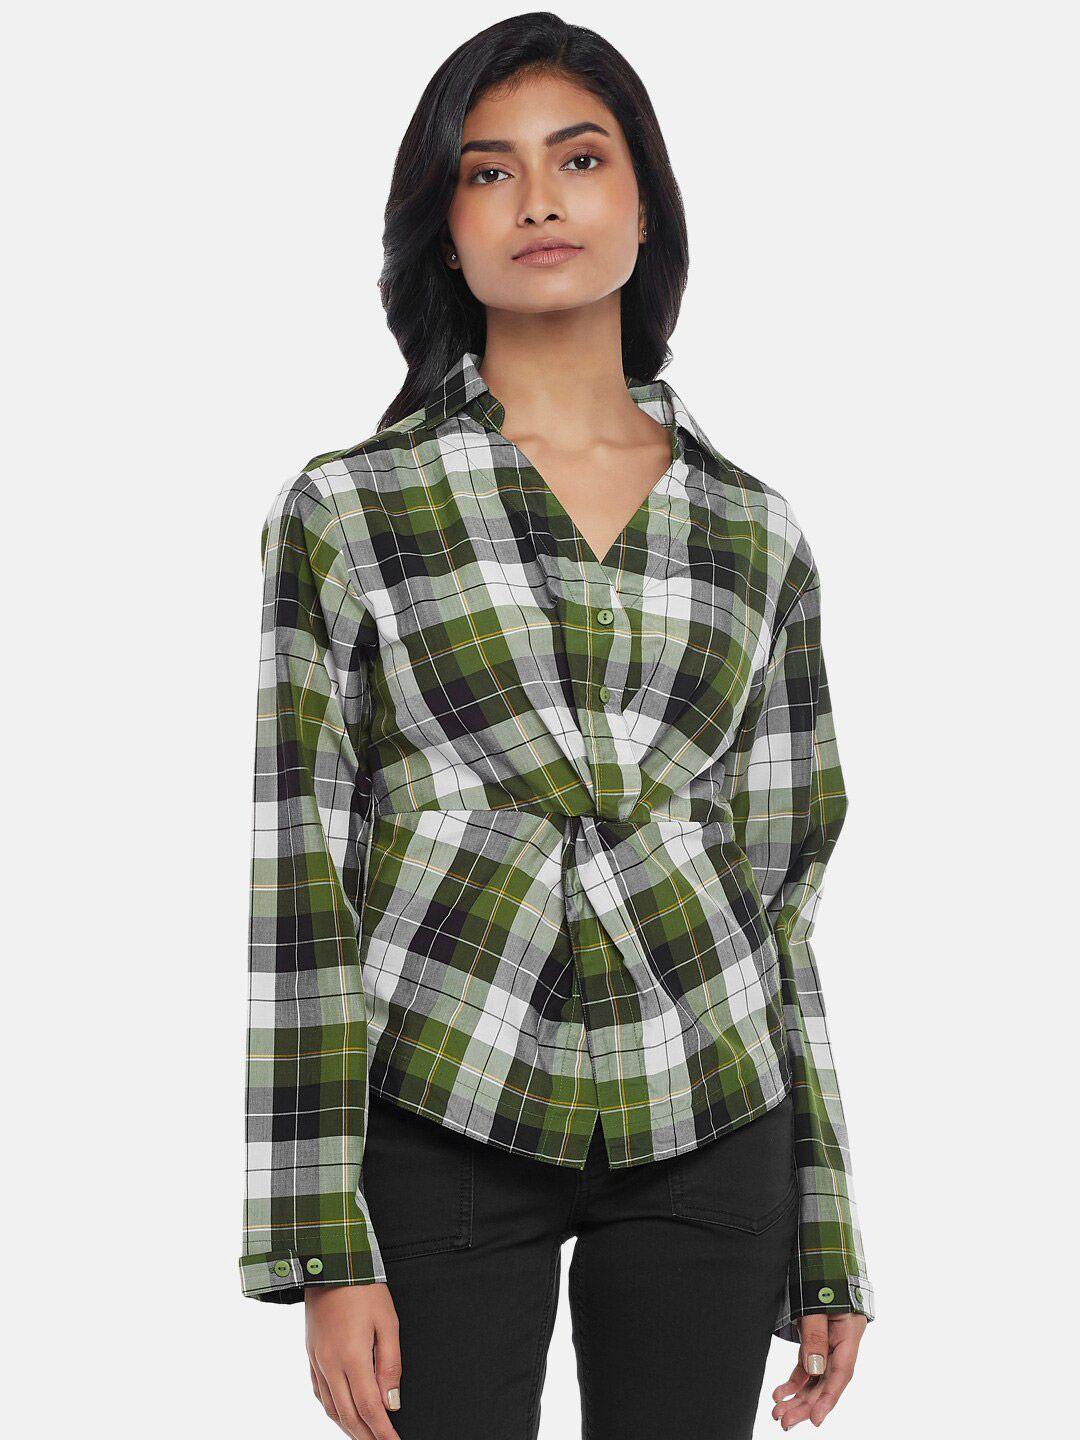 sf jeans by pantaloons women olive green tartan checked casual shirt